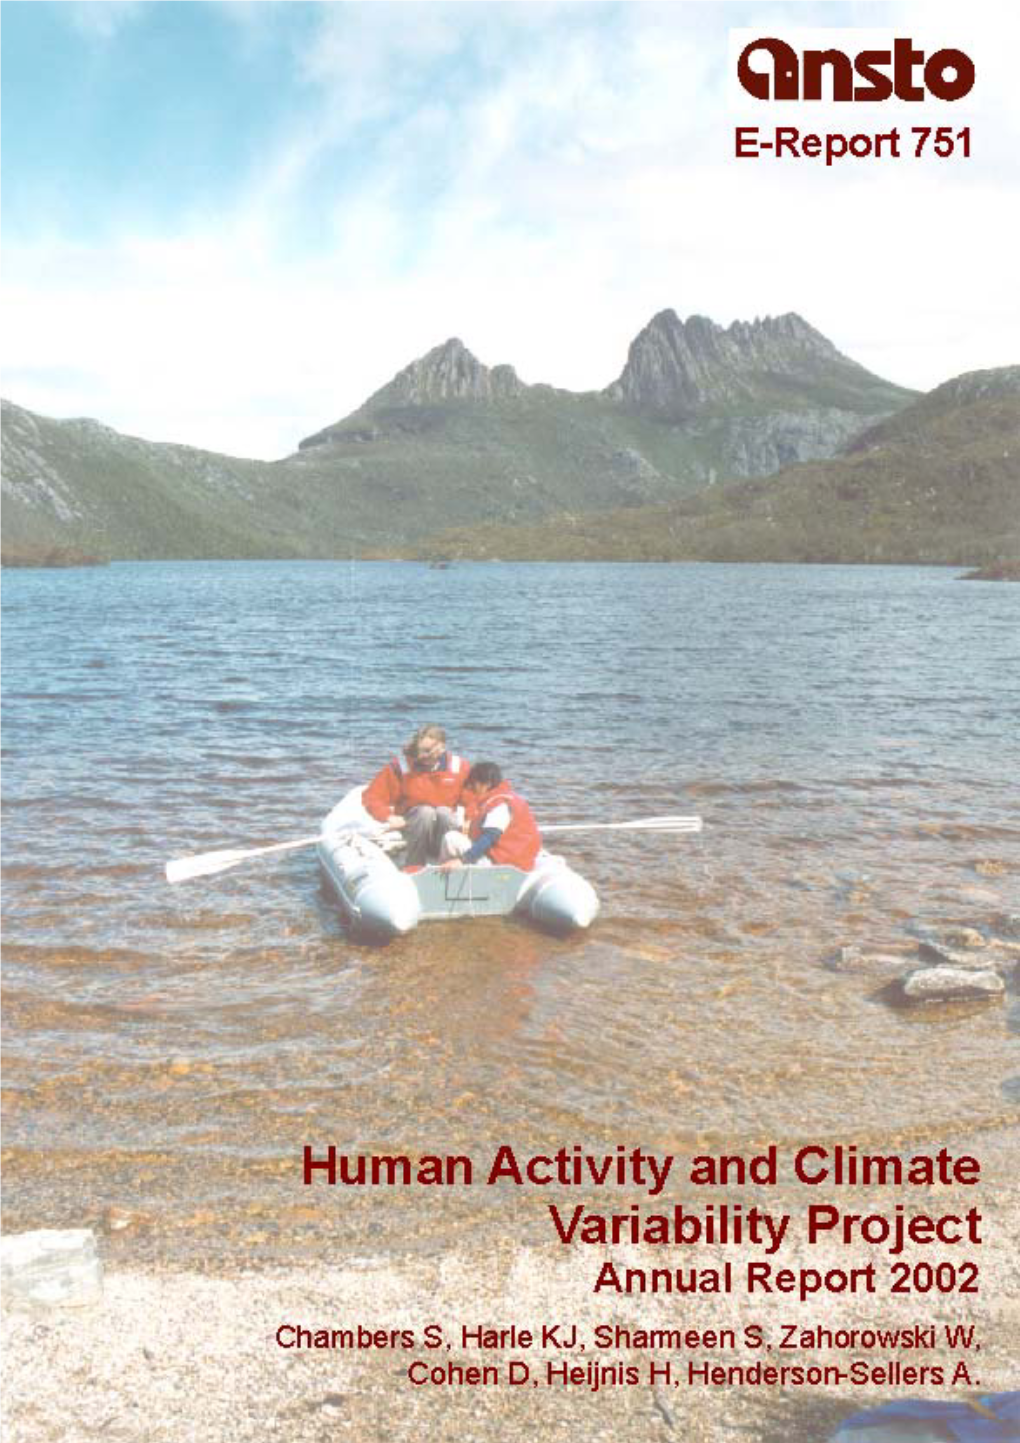 Human Activity and Climate Variability Project: Annual Report 2002